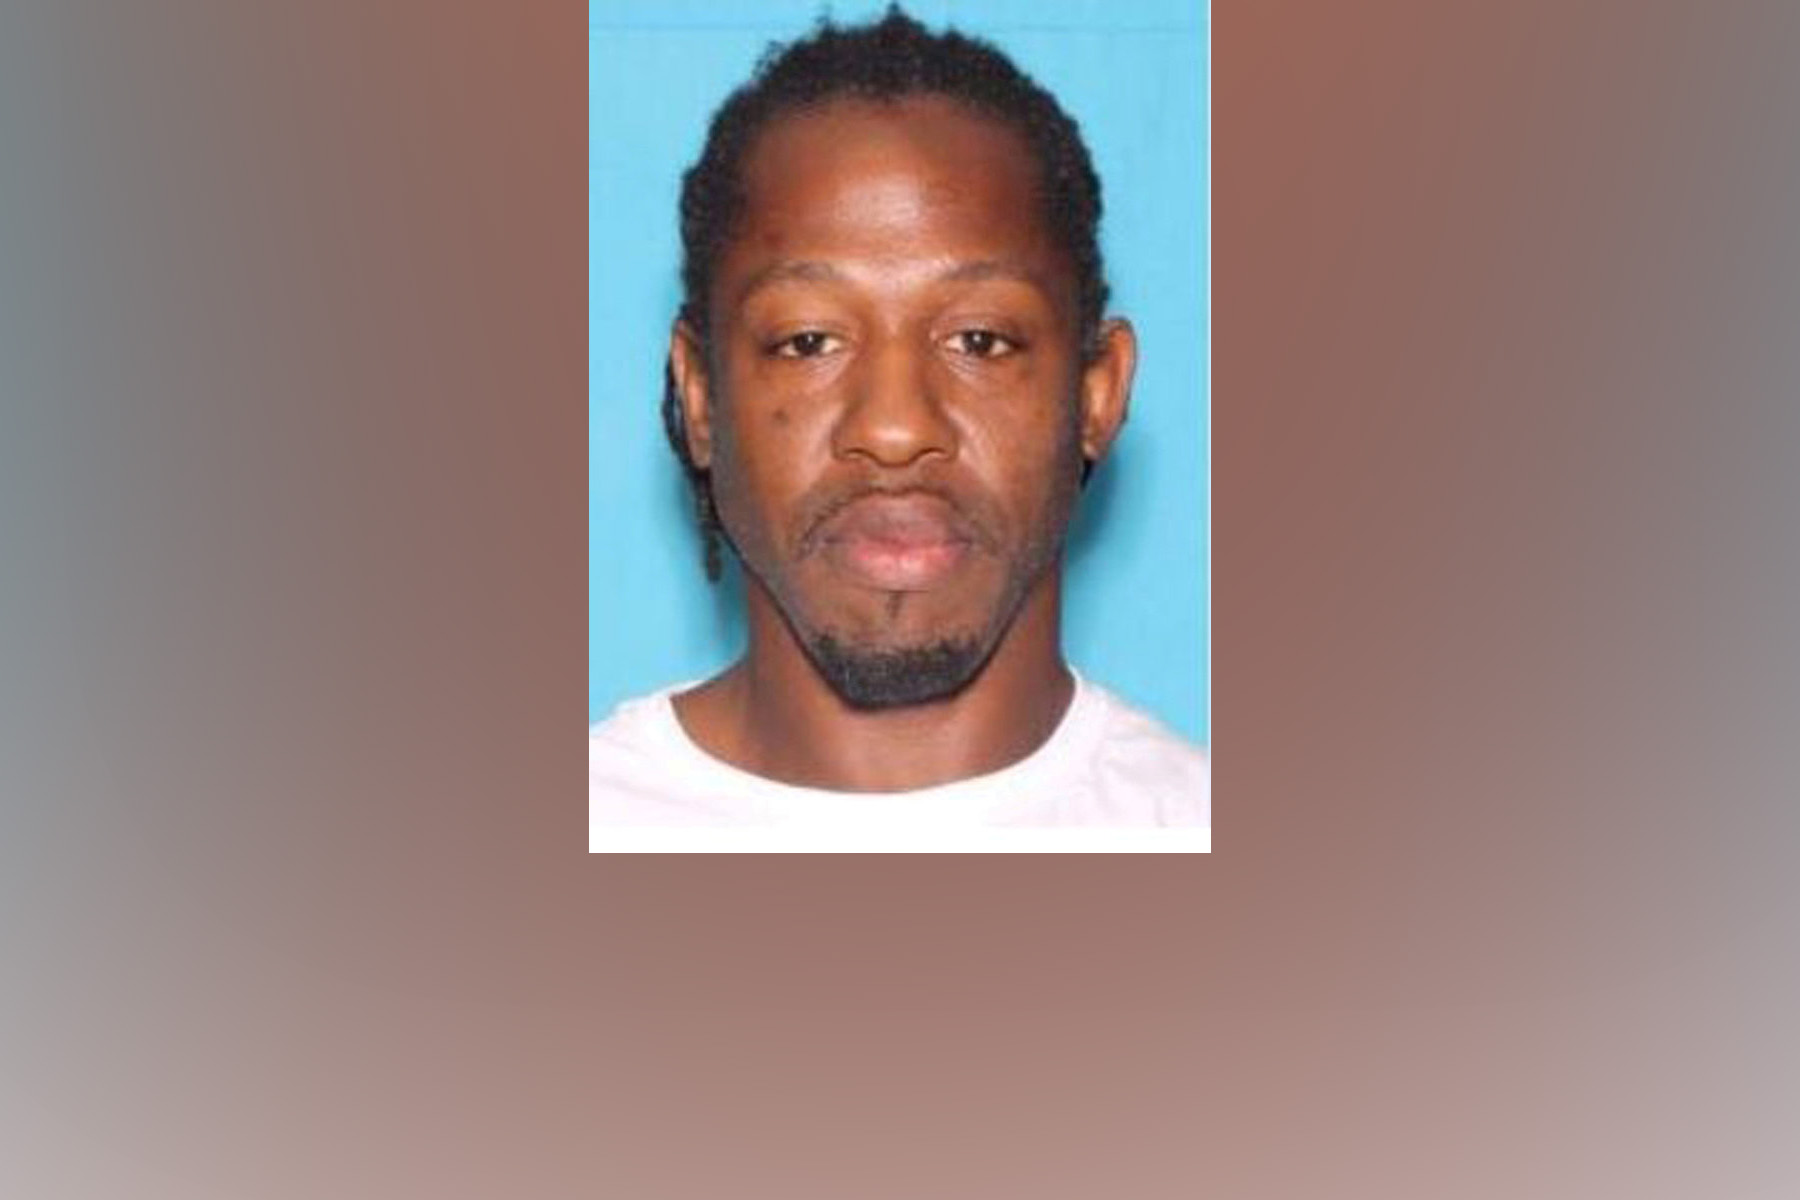 PHOTO: Markeith Loyd, wanted in connection with the shooting death of an Orlando police officer, is shown in this undated booking photo in Orlando, Florida released Jan. 9, 2017.  